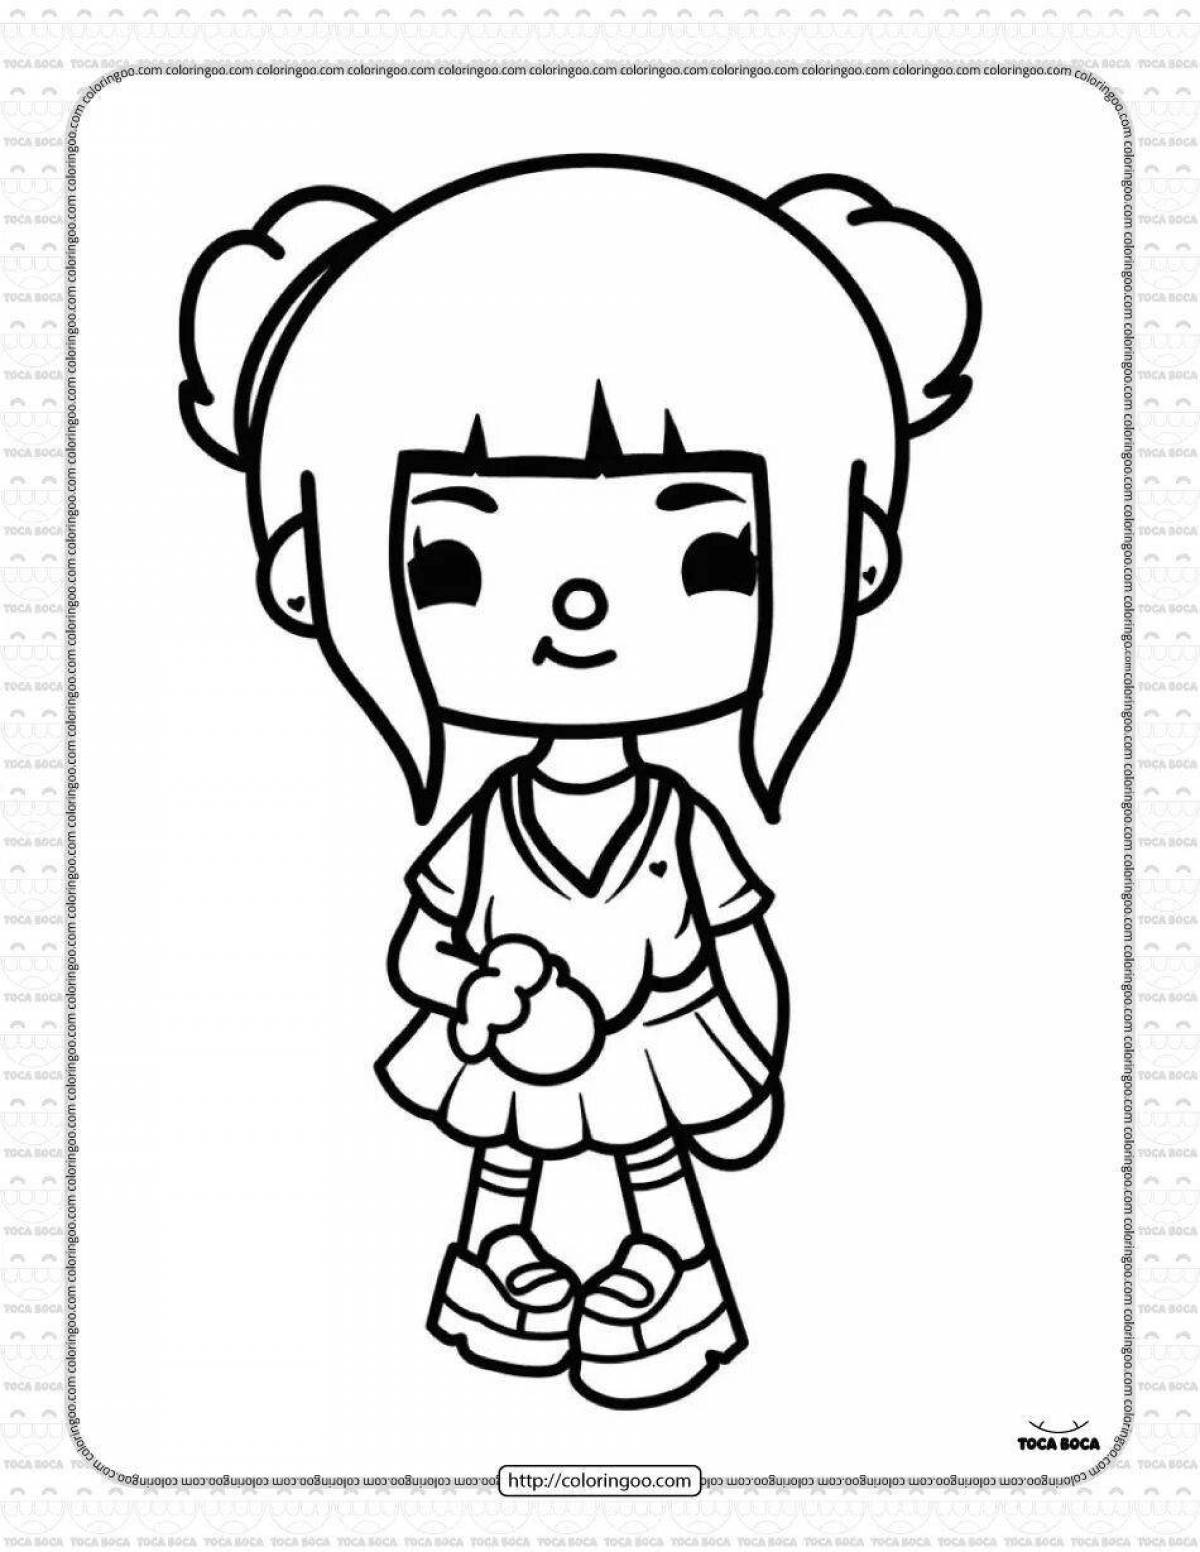 Color-frenzy coloring pages for girls toko boka